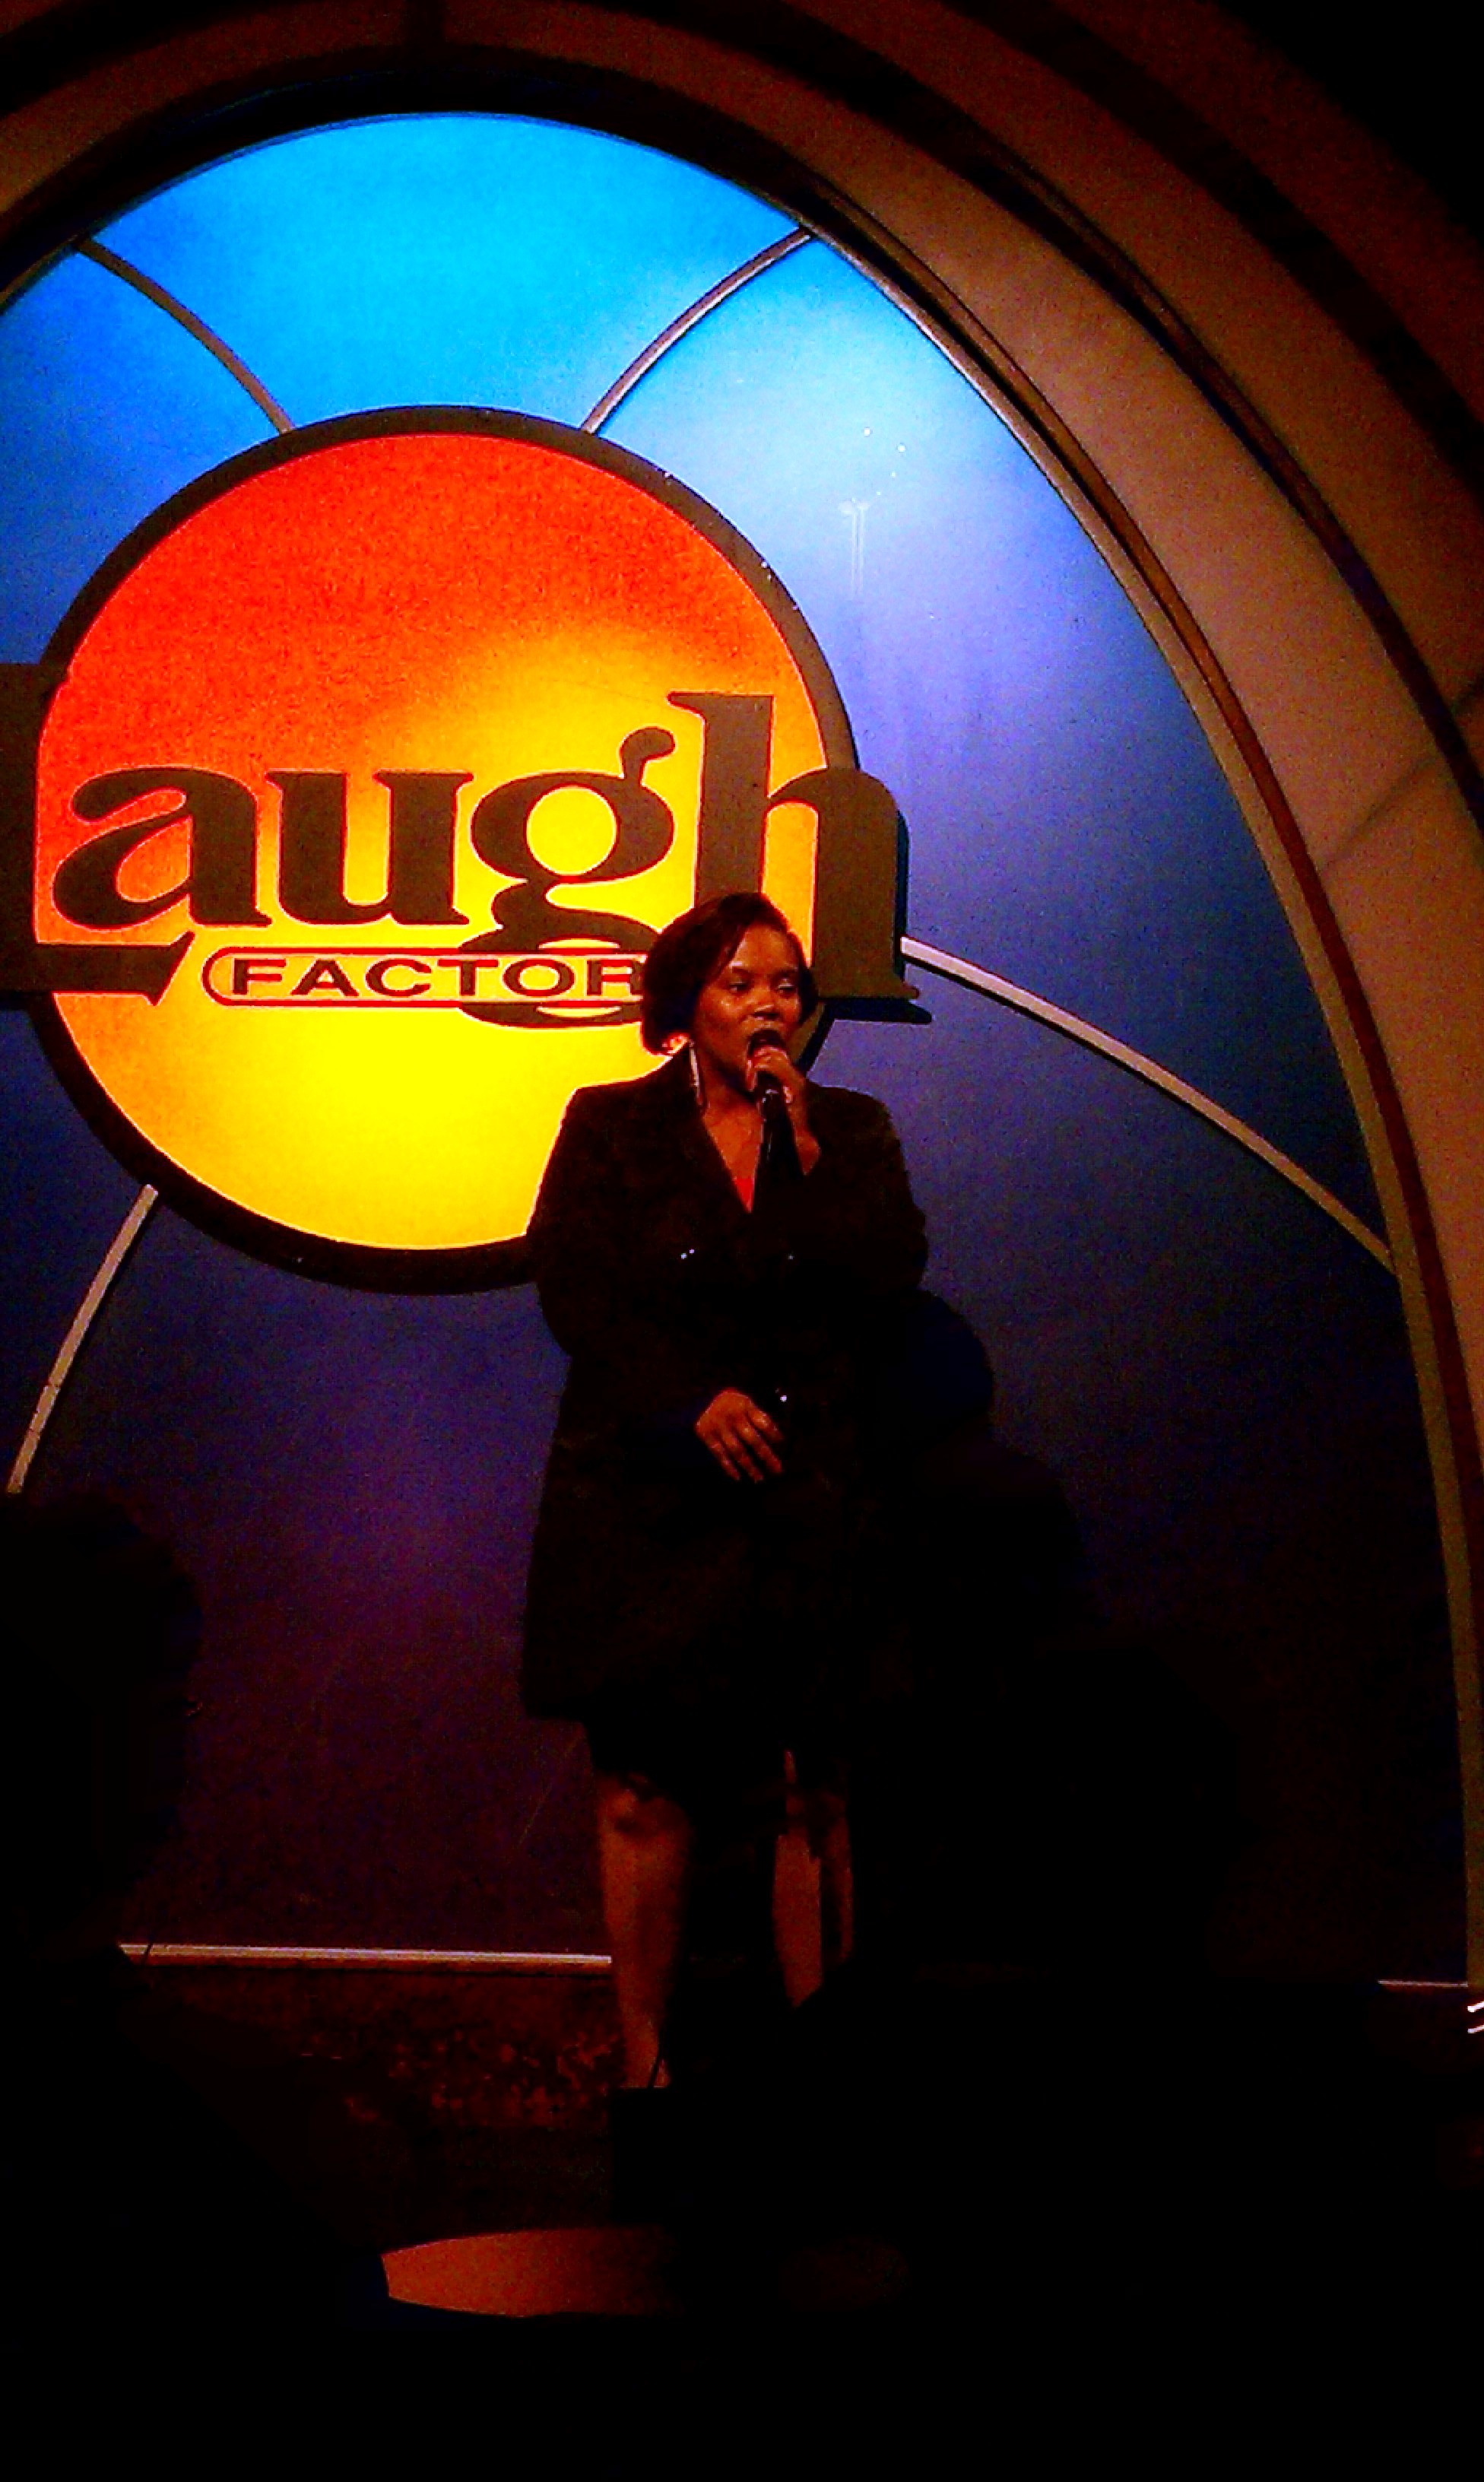 I am doing a comedy stand up set at the Laugh Factory on Sunset Boulevard.